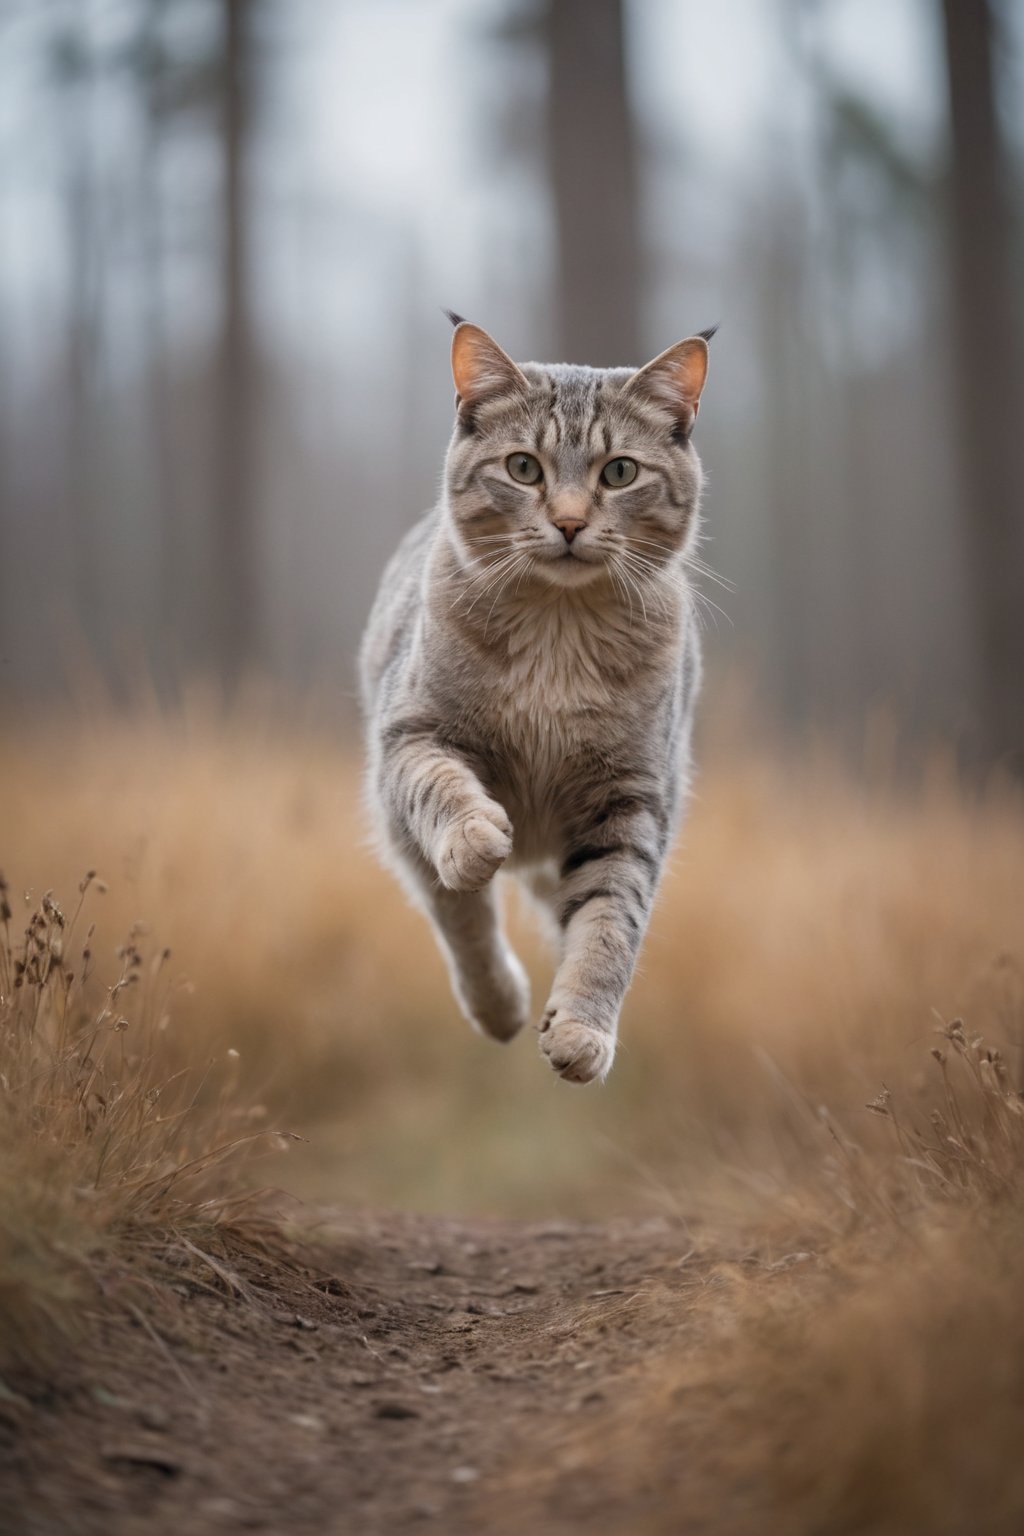 Majestic cat in flight, natural light highlighting subtle textures, smooth bokeh background merging cool blues and soft earth tones, expert use of shutter speed freezing delicate movement, absence of human interference, pure wilderness portrayal, optical excellence revealing minute details, film photography aesthetic, vibrant, whimsical